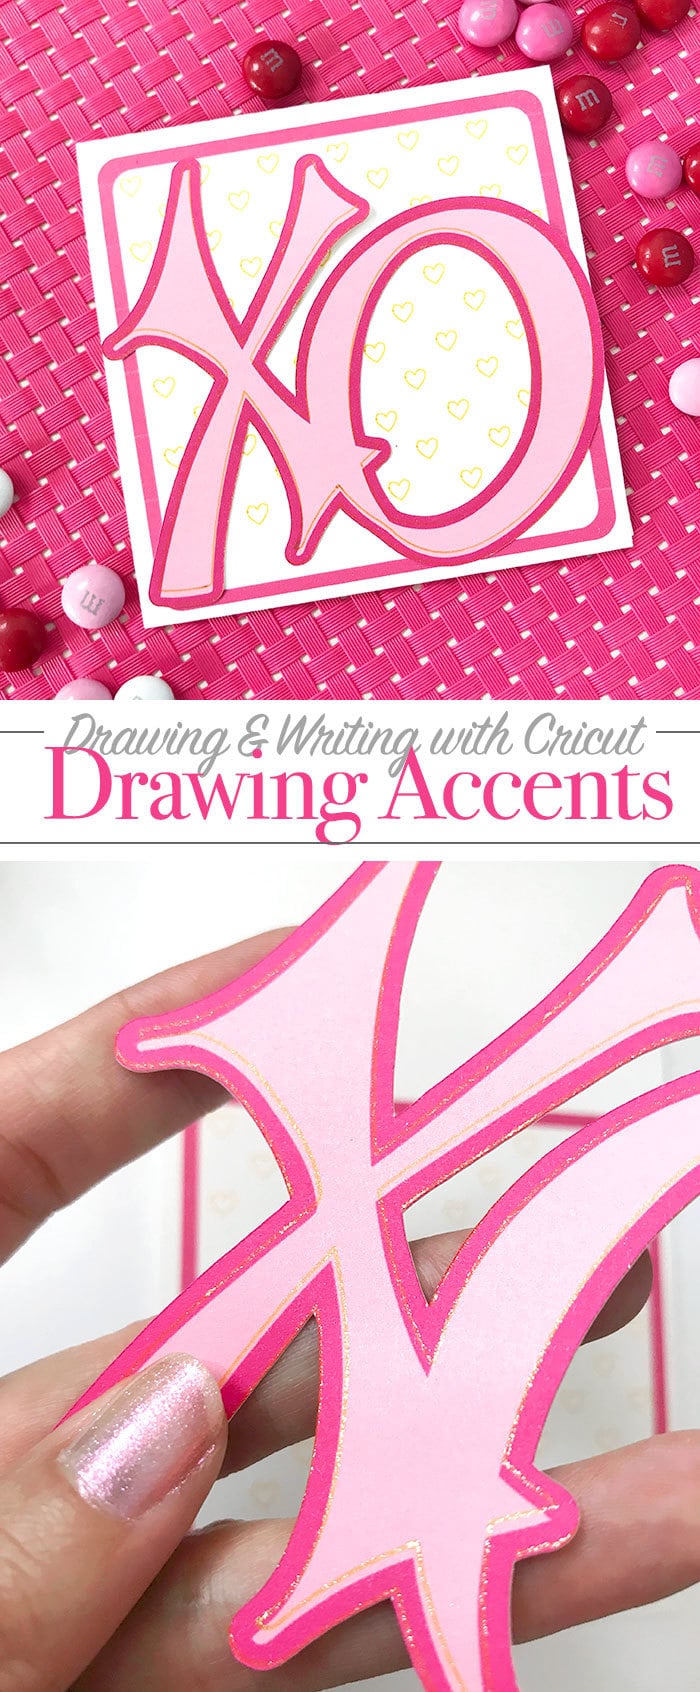 Drawing accents when creating Cricut Projects - add sparkle with glitter pens